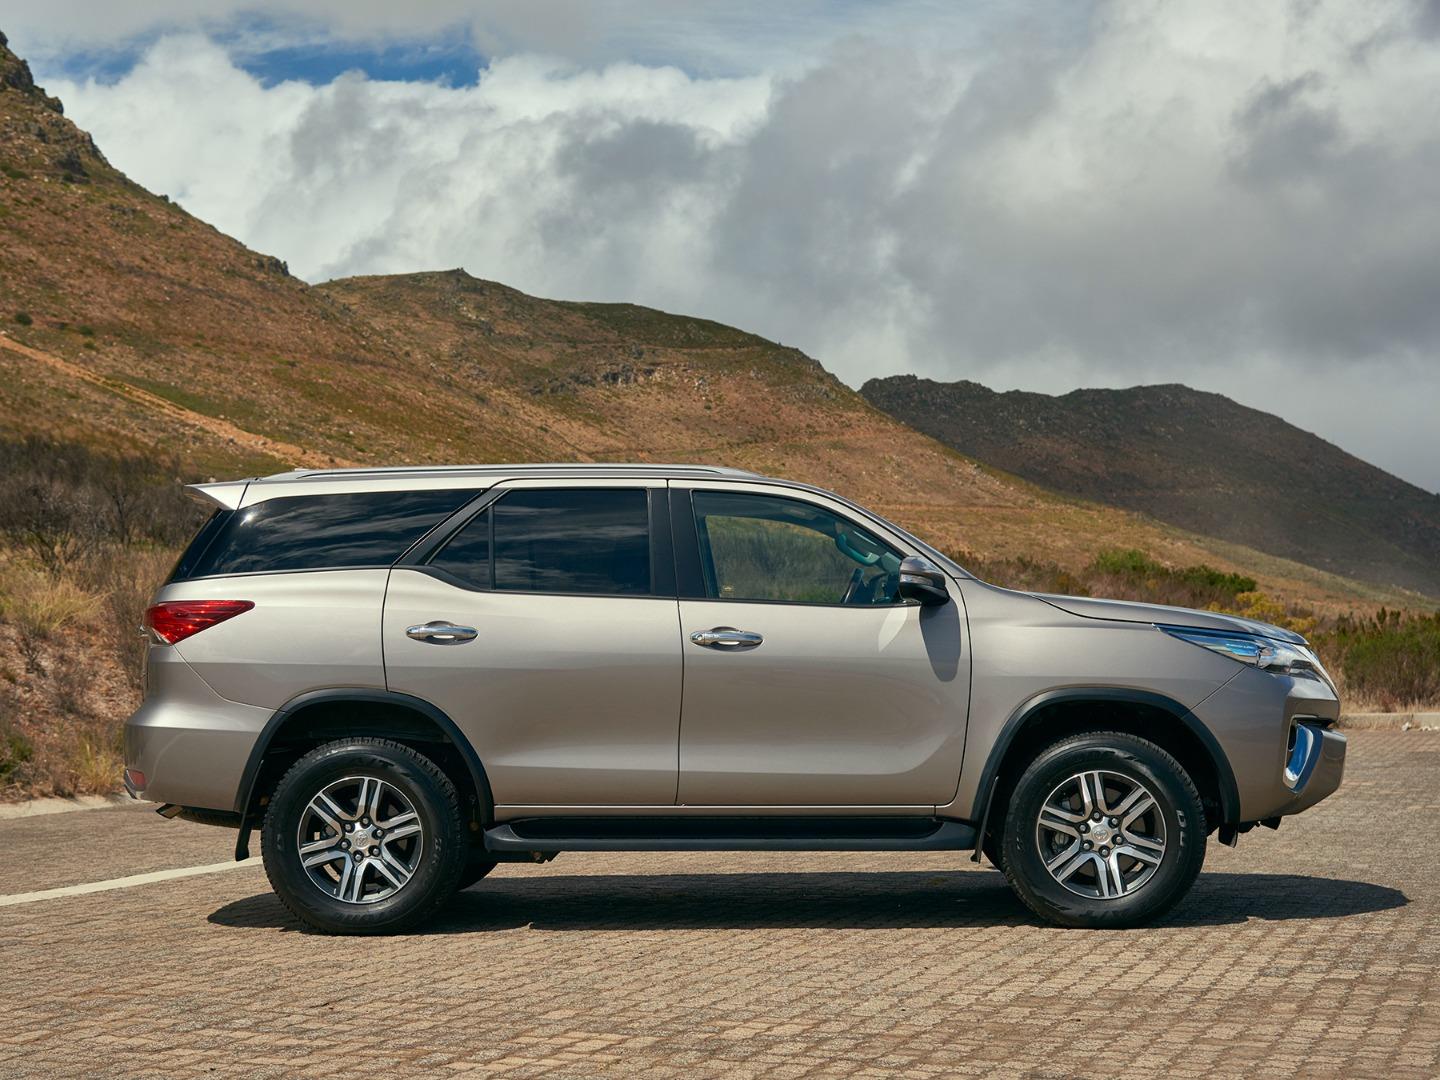 how much is my toyota fortuner worth?